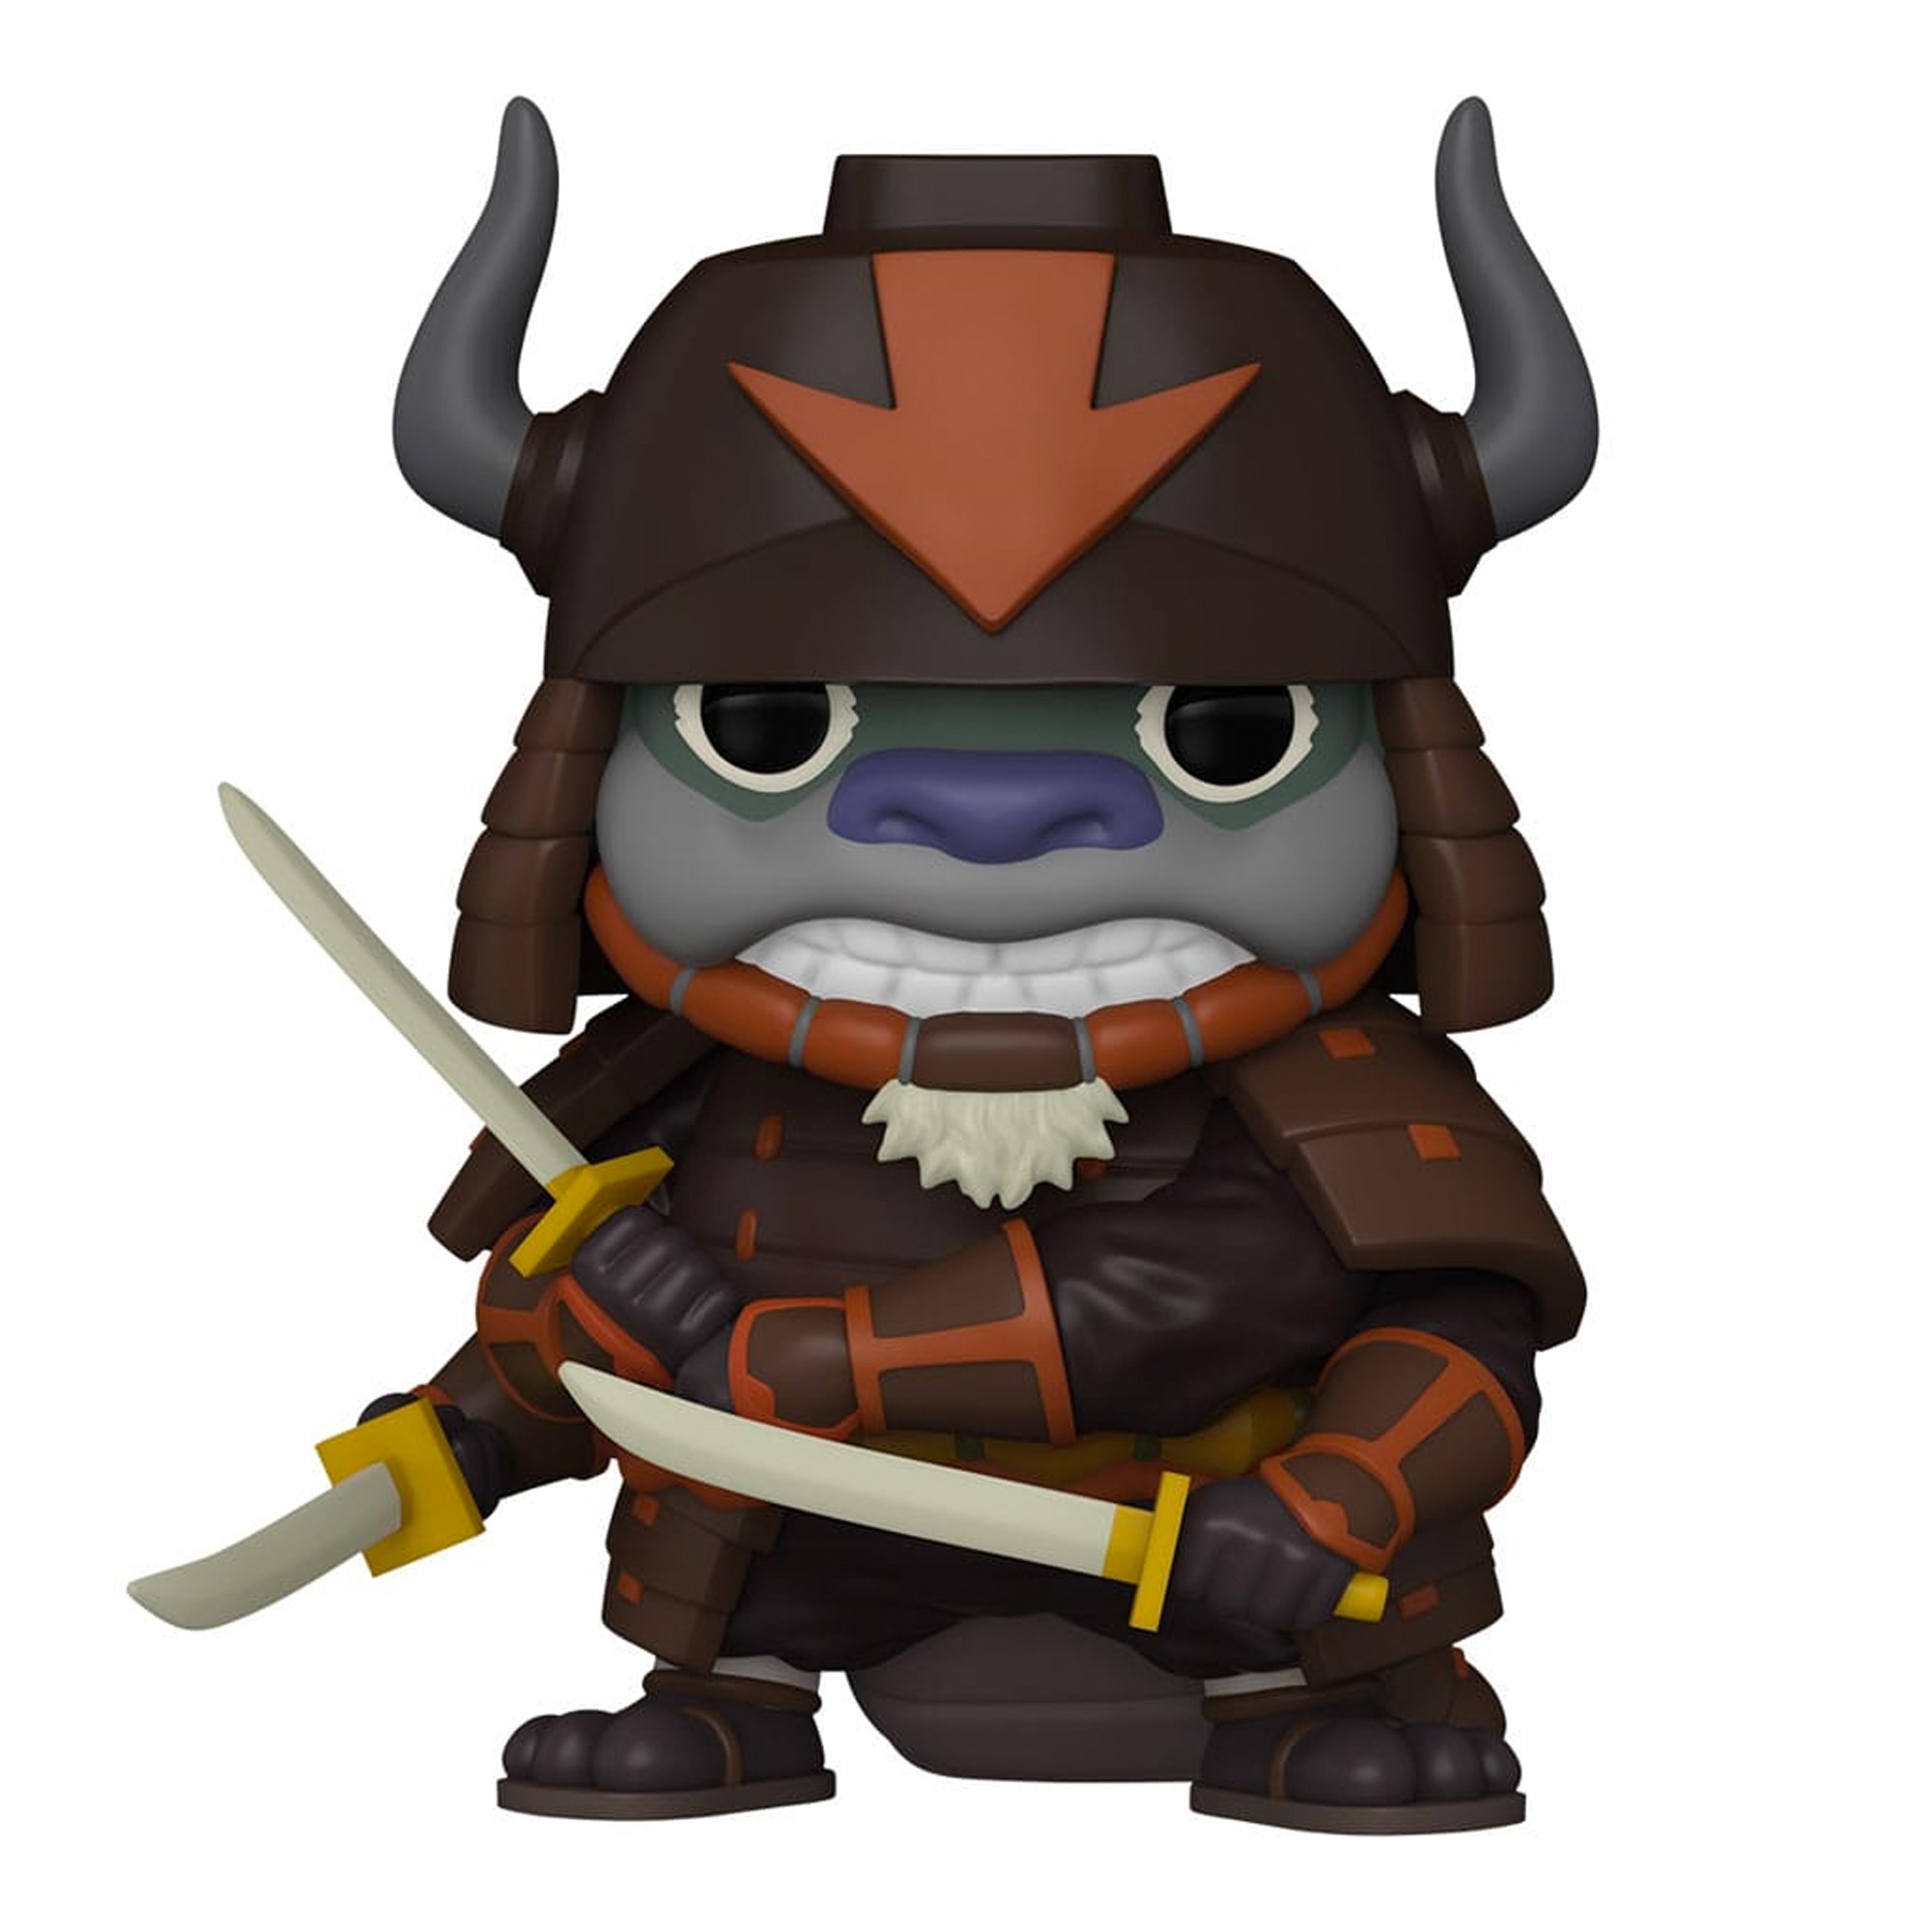 Funko POP! Appa with Armor - Avatar: The Last Airbender